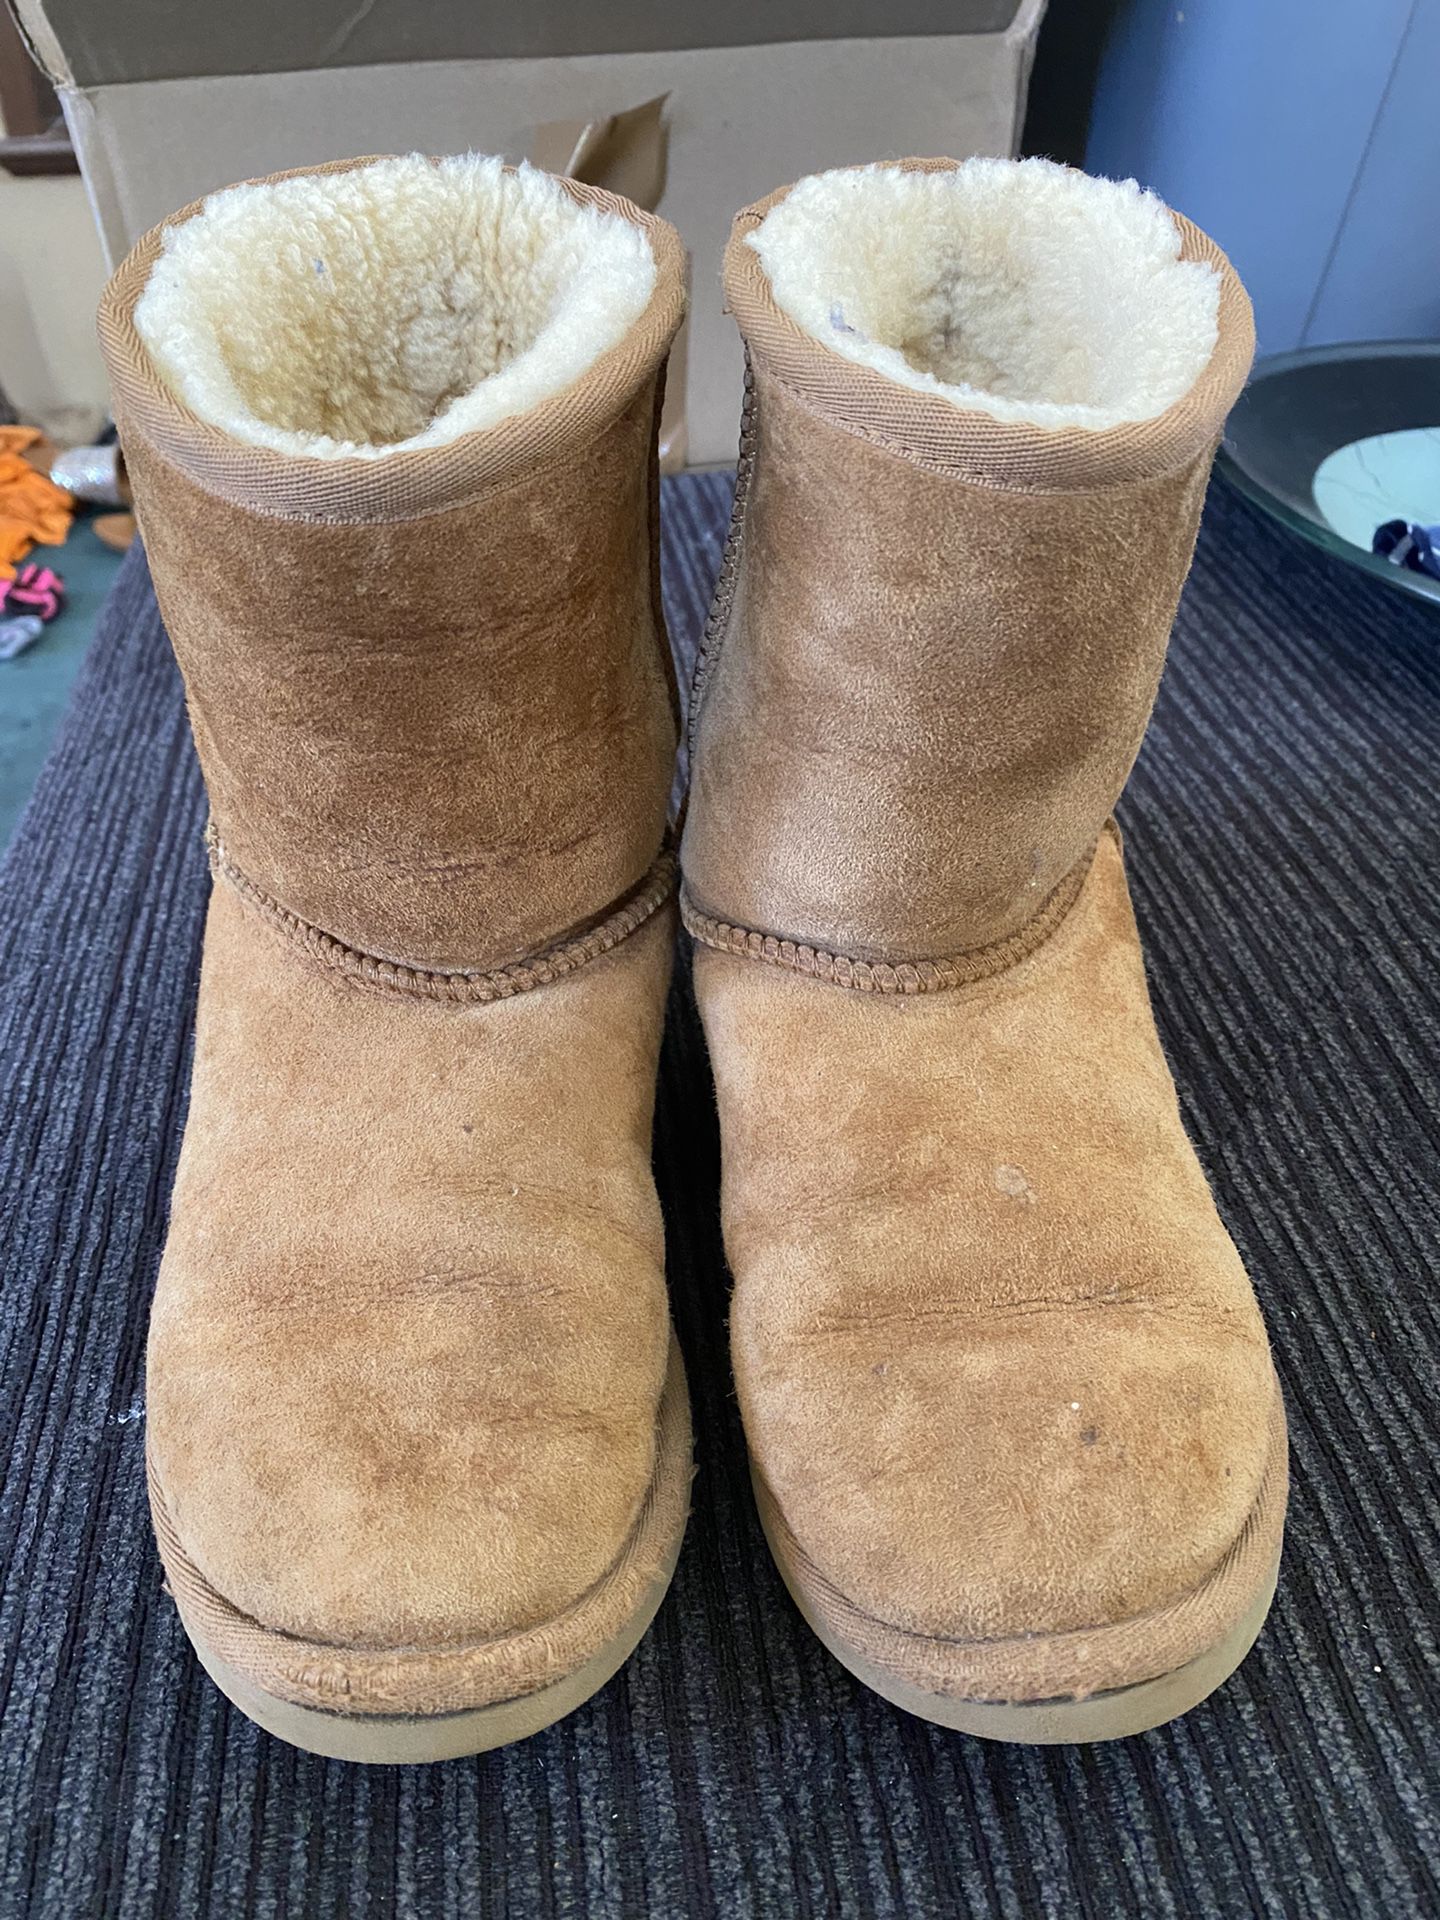 Kids Uggs Size 3